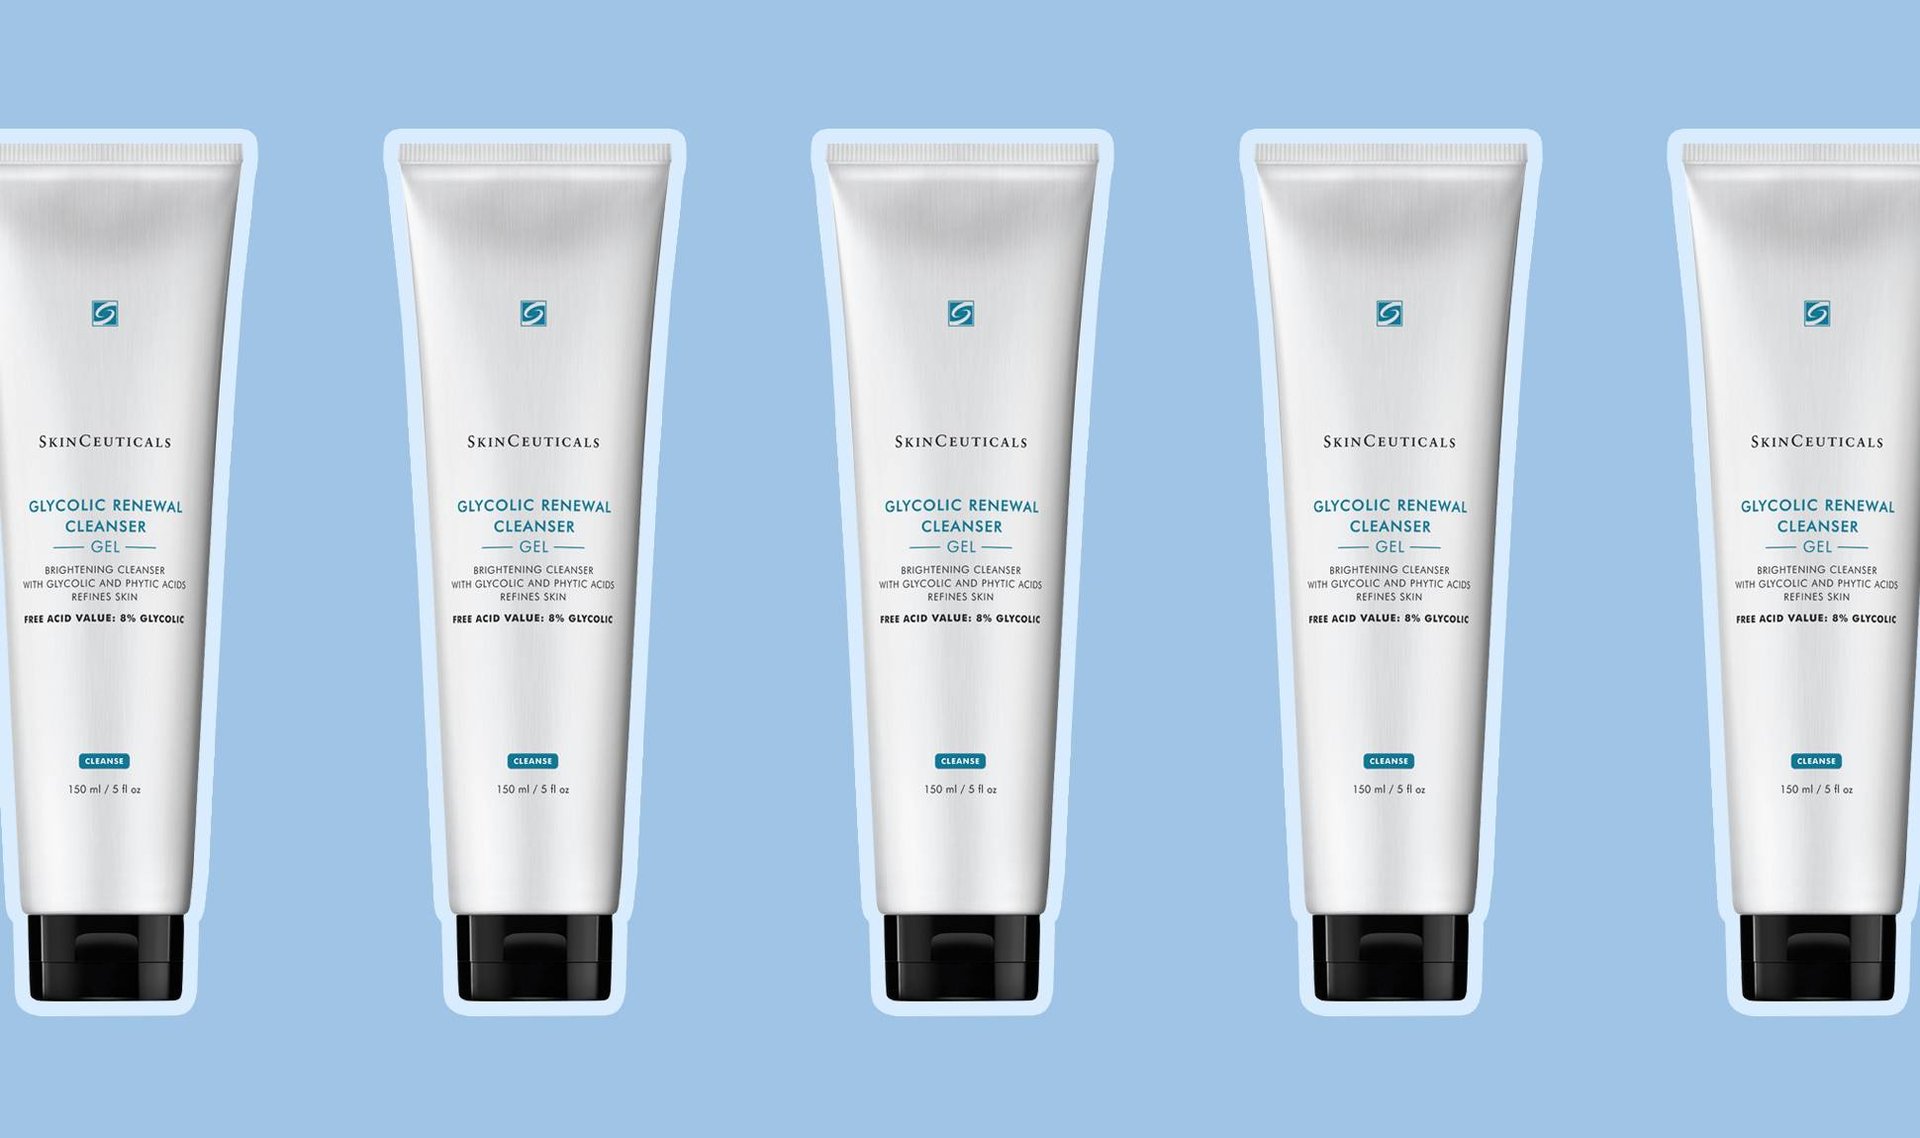 The SkinCeuticals Glycolic Renewal Cleanser That Made One Acid-Wary Editor Reconsider Her Routine